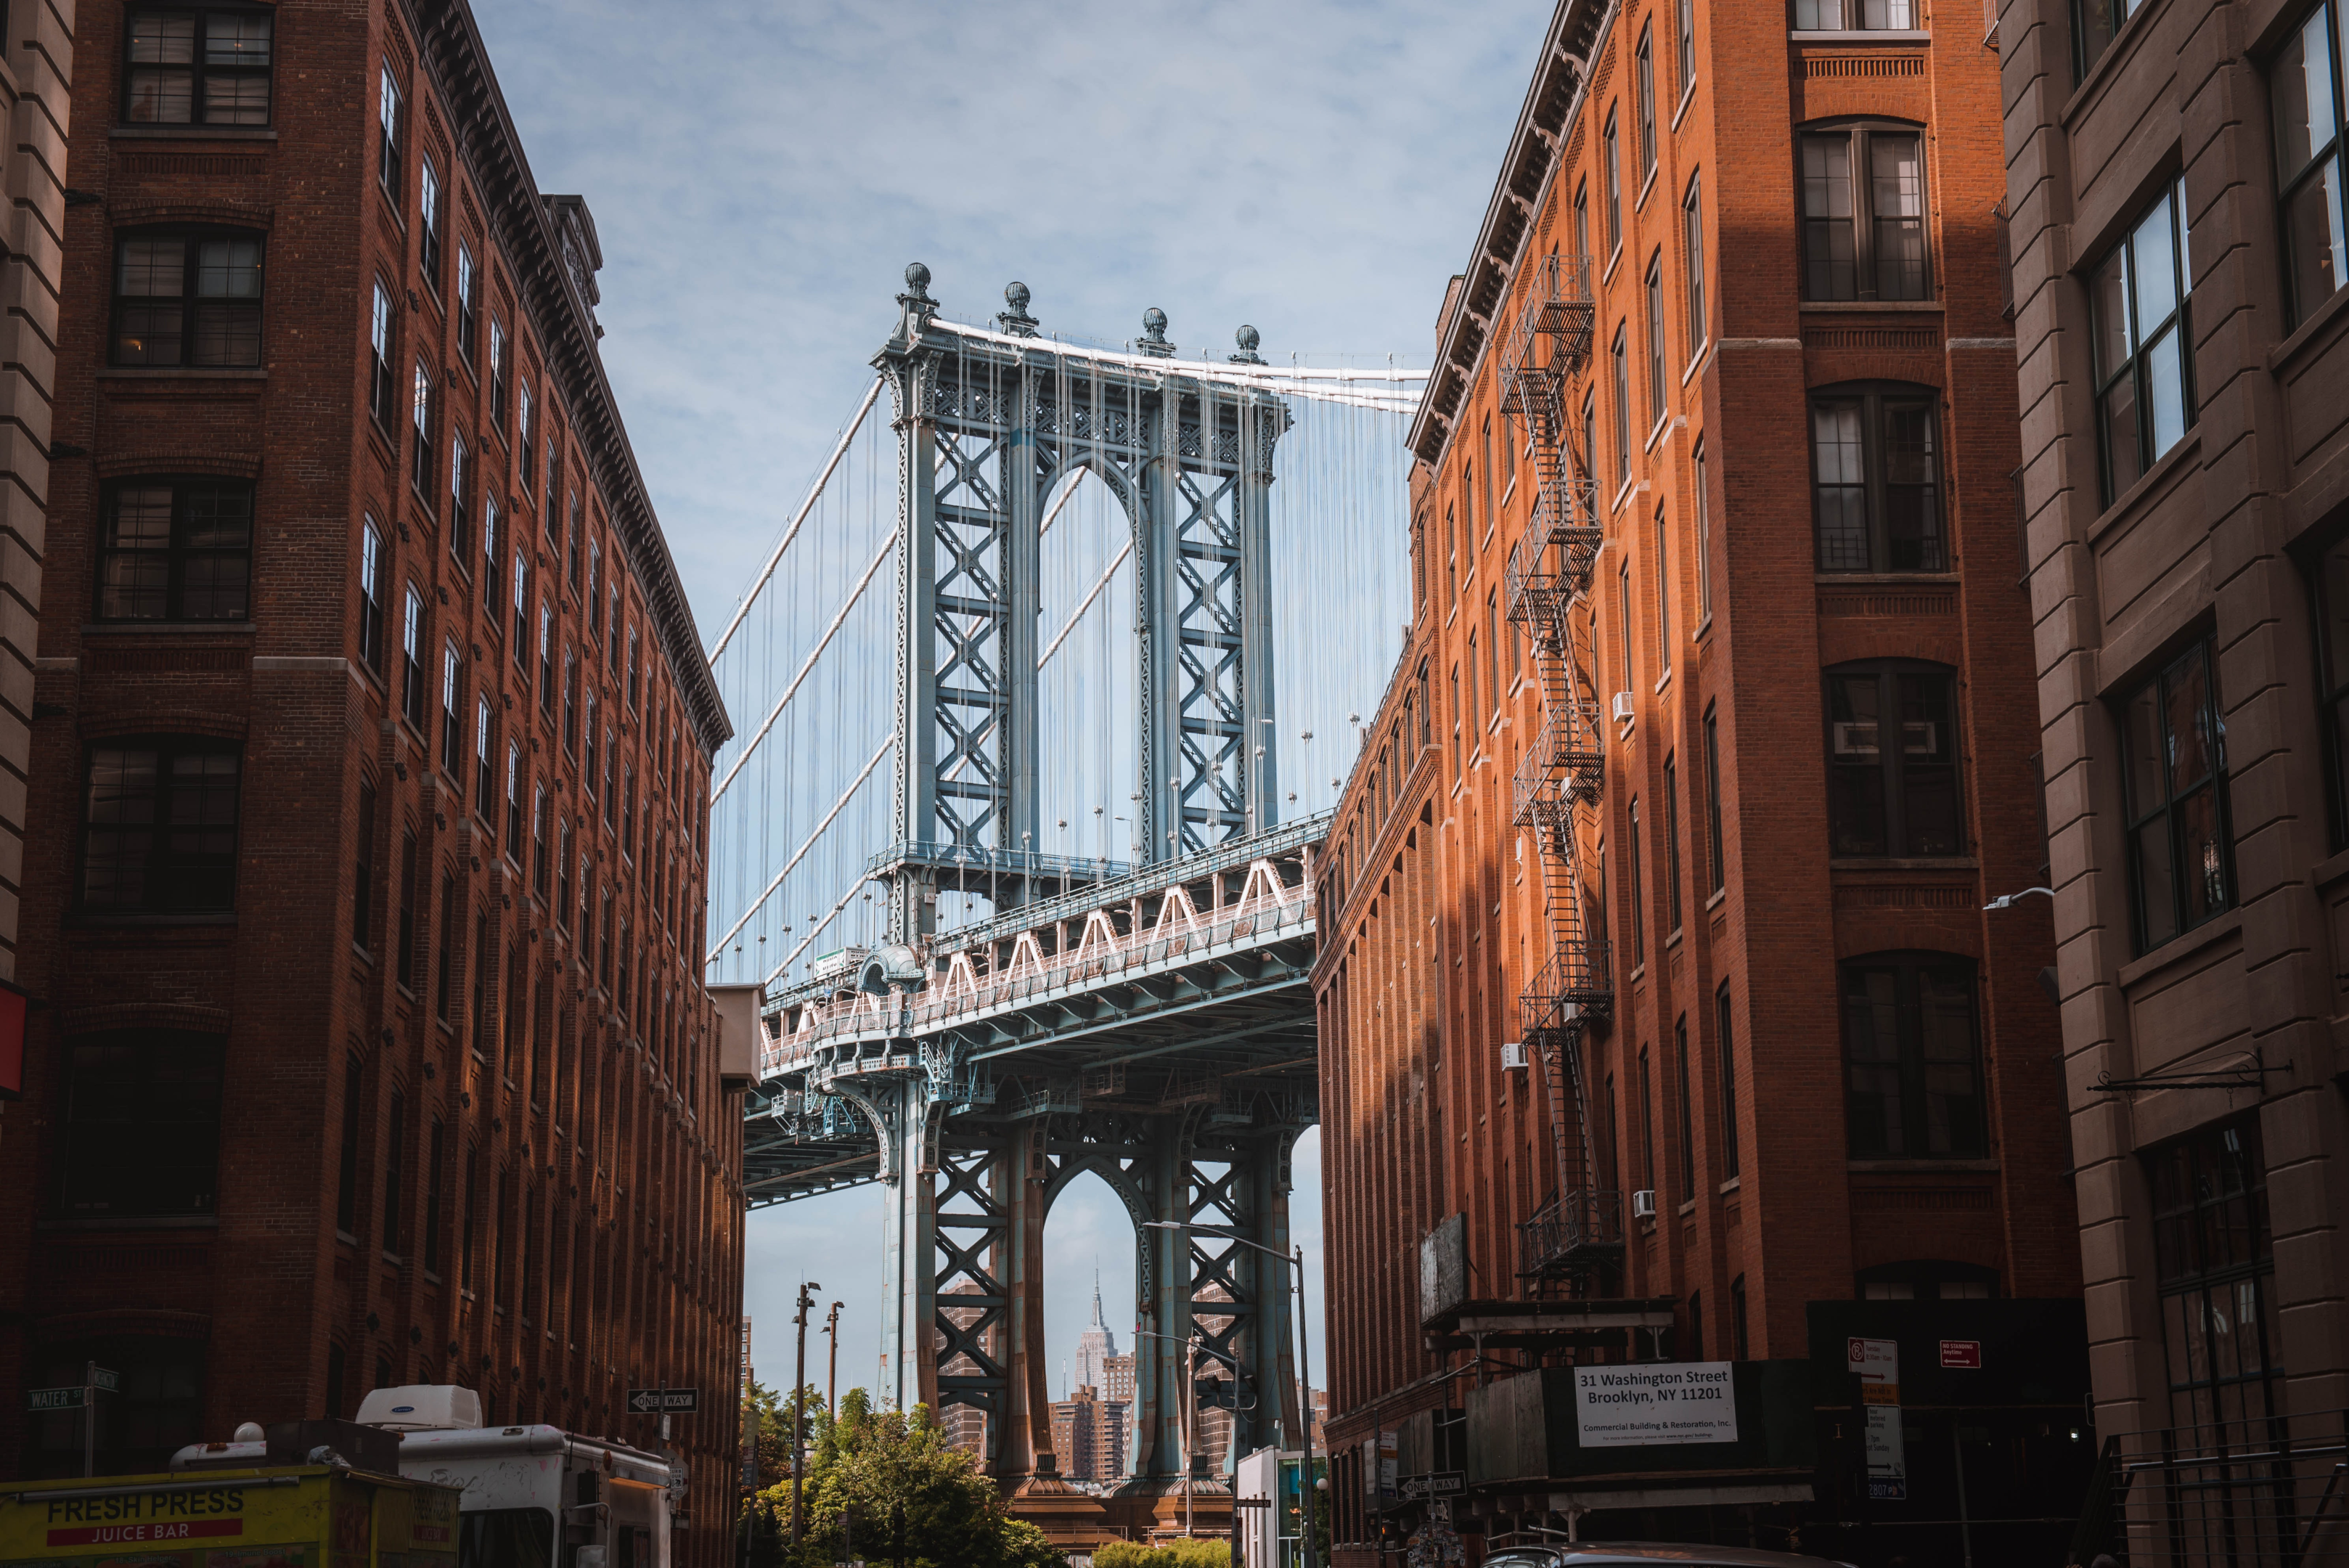 The Manhattan Bridge is one of the iconic architectural works in the United States of America | Photo by Mario Cuadros from Pexels